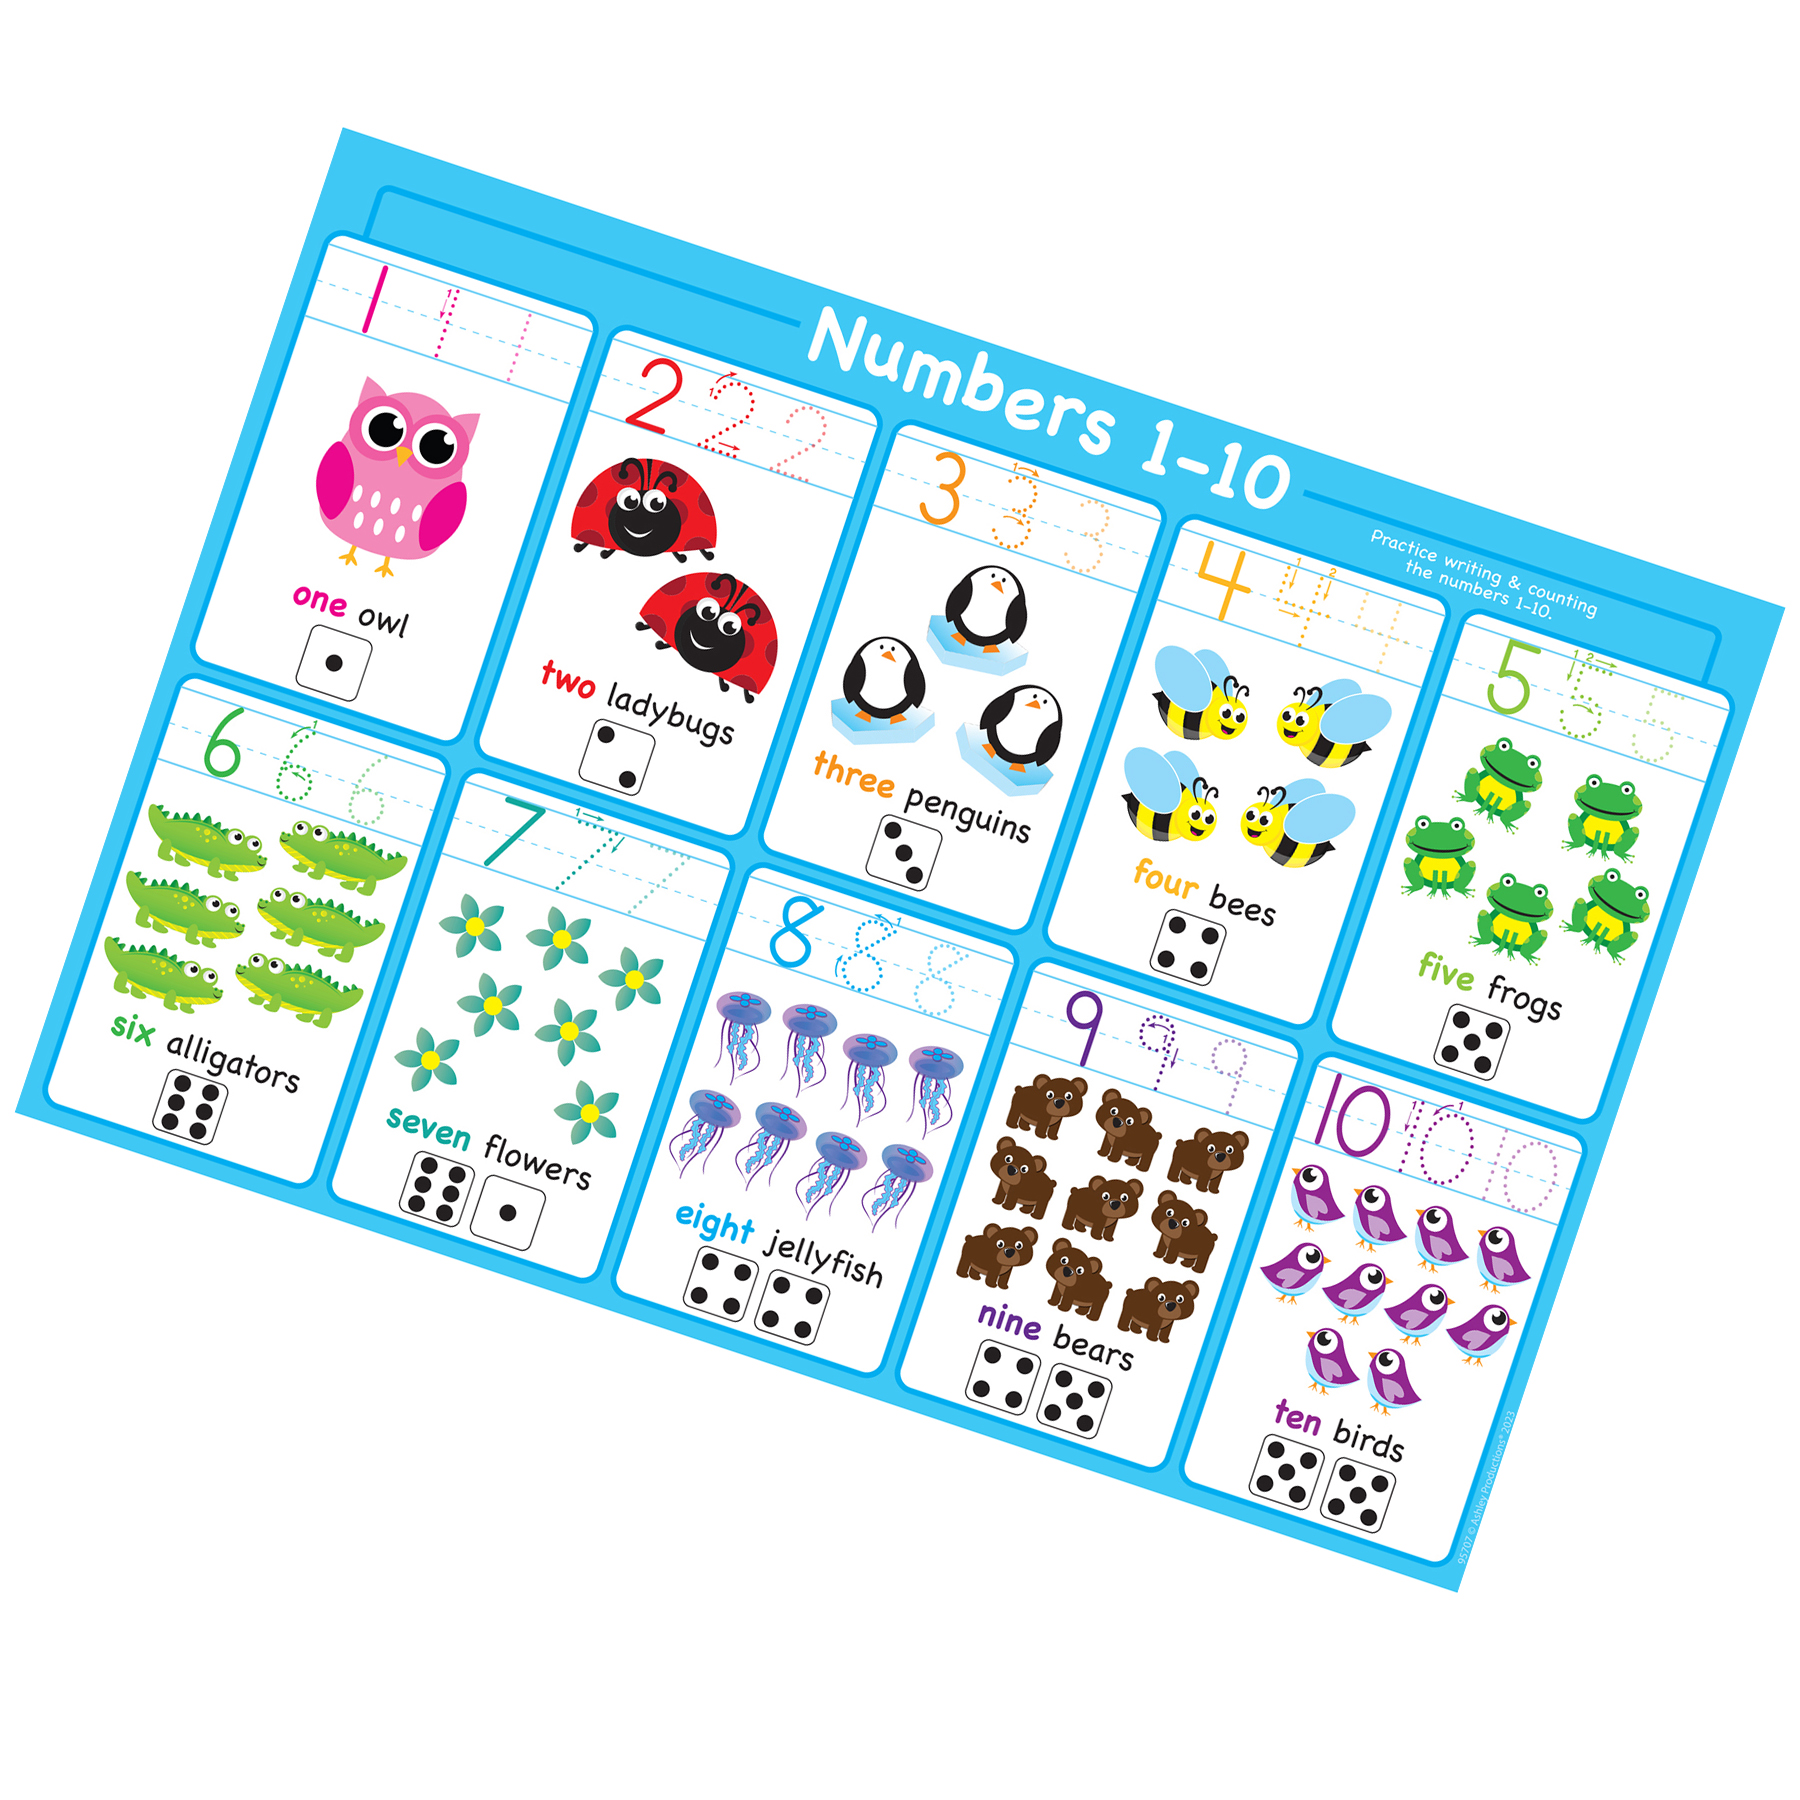 Ashley Productions Placemat Studio Smart Poly 1-10 Numbers Learning Placemat, 13" x 19", Single Sided, Pack of 10 image number null